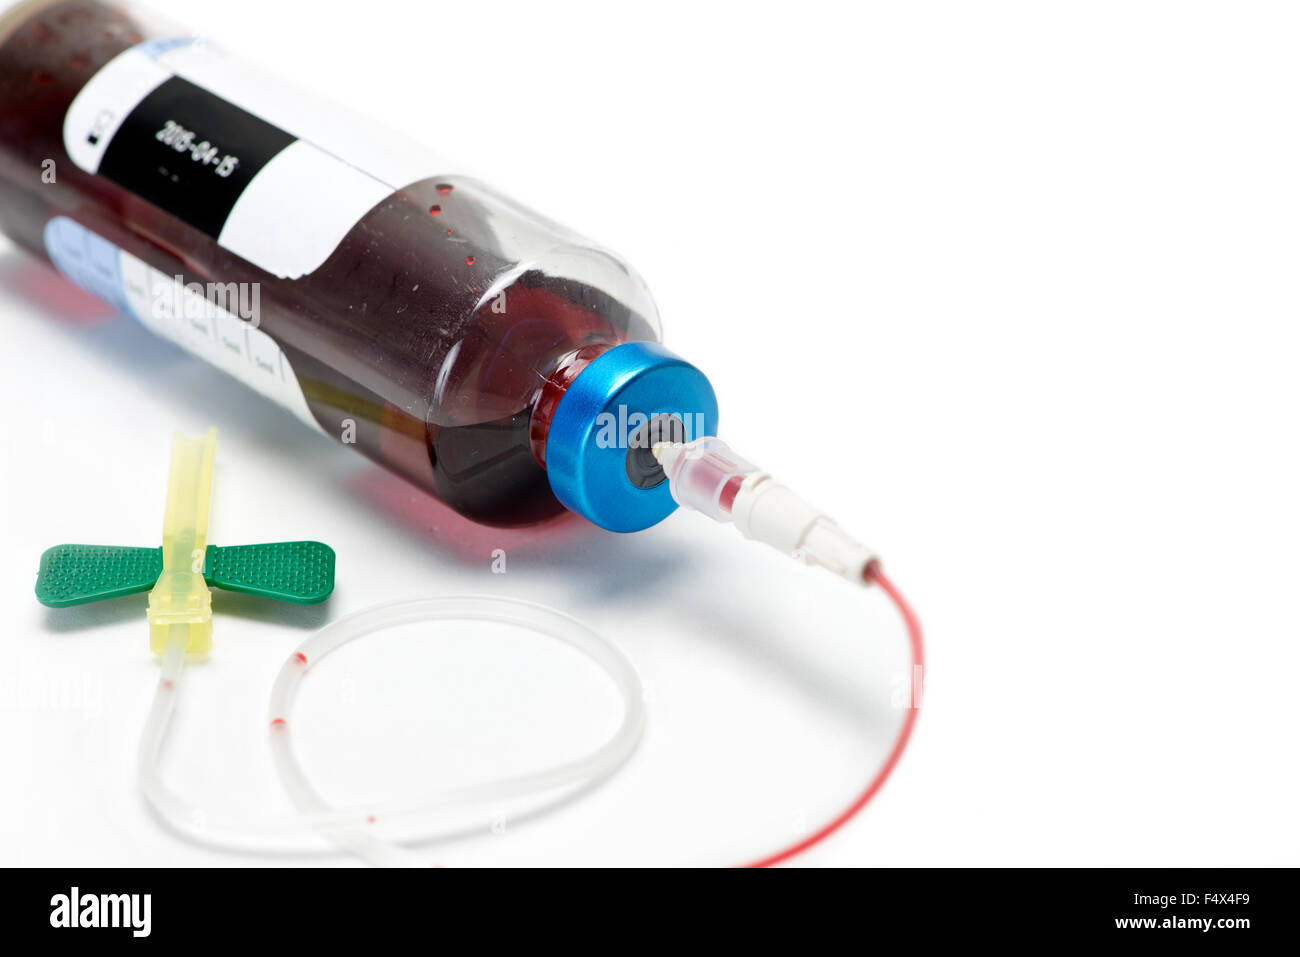 Aerobic blood culture bottle with 21 gauge butterfly catheter and copyspace. Stock Photo